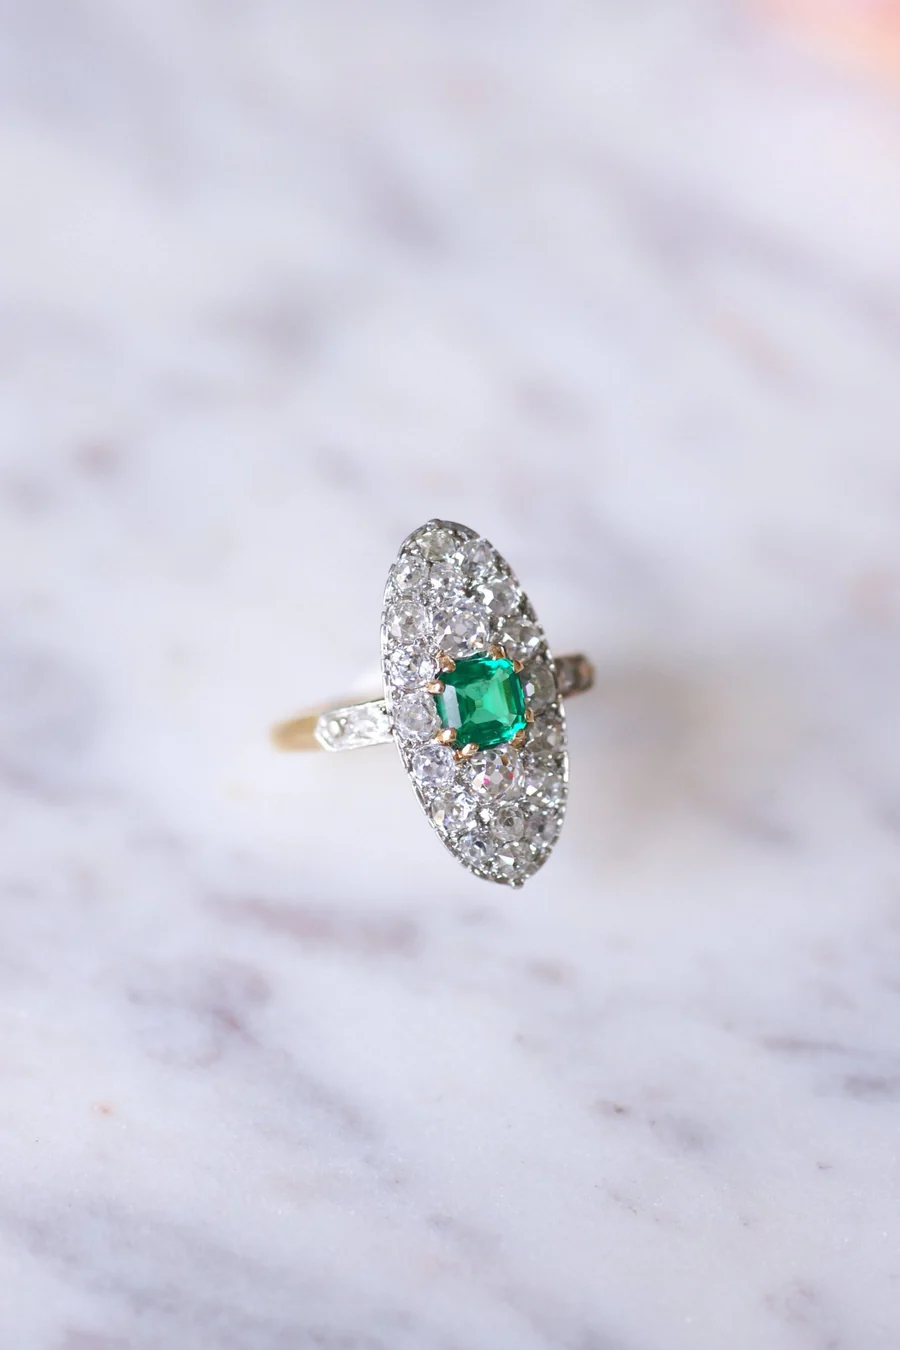 Marquise Belle Epoque emerald ring with diamonds on gold and platinum - Galerie Pénélope